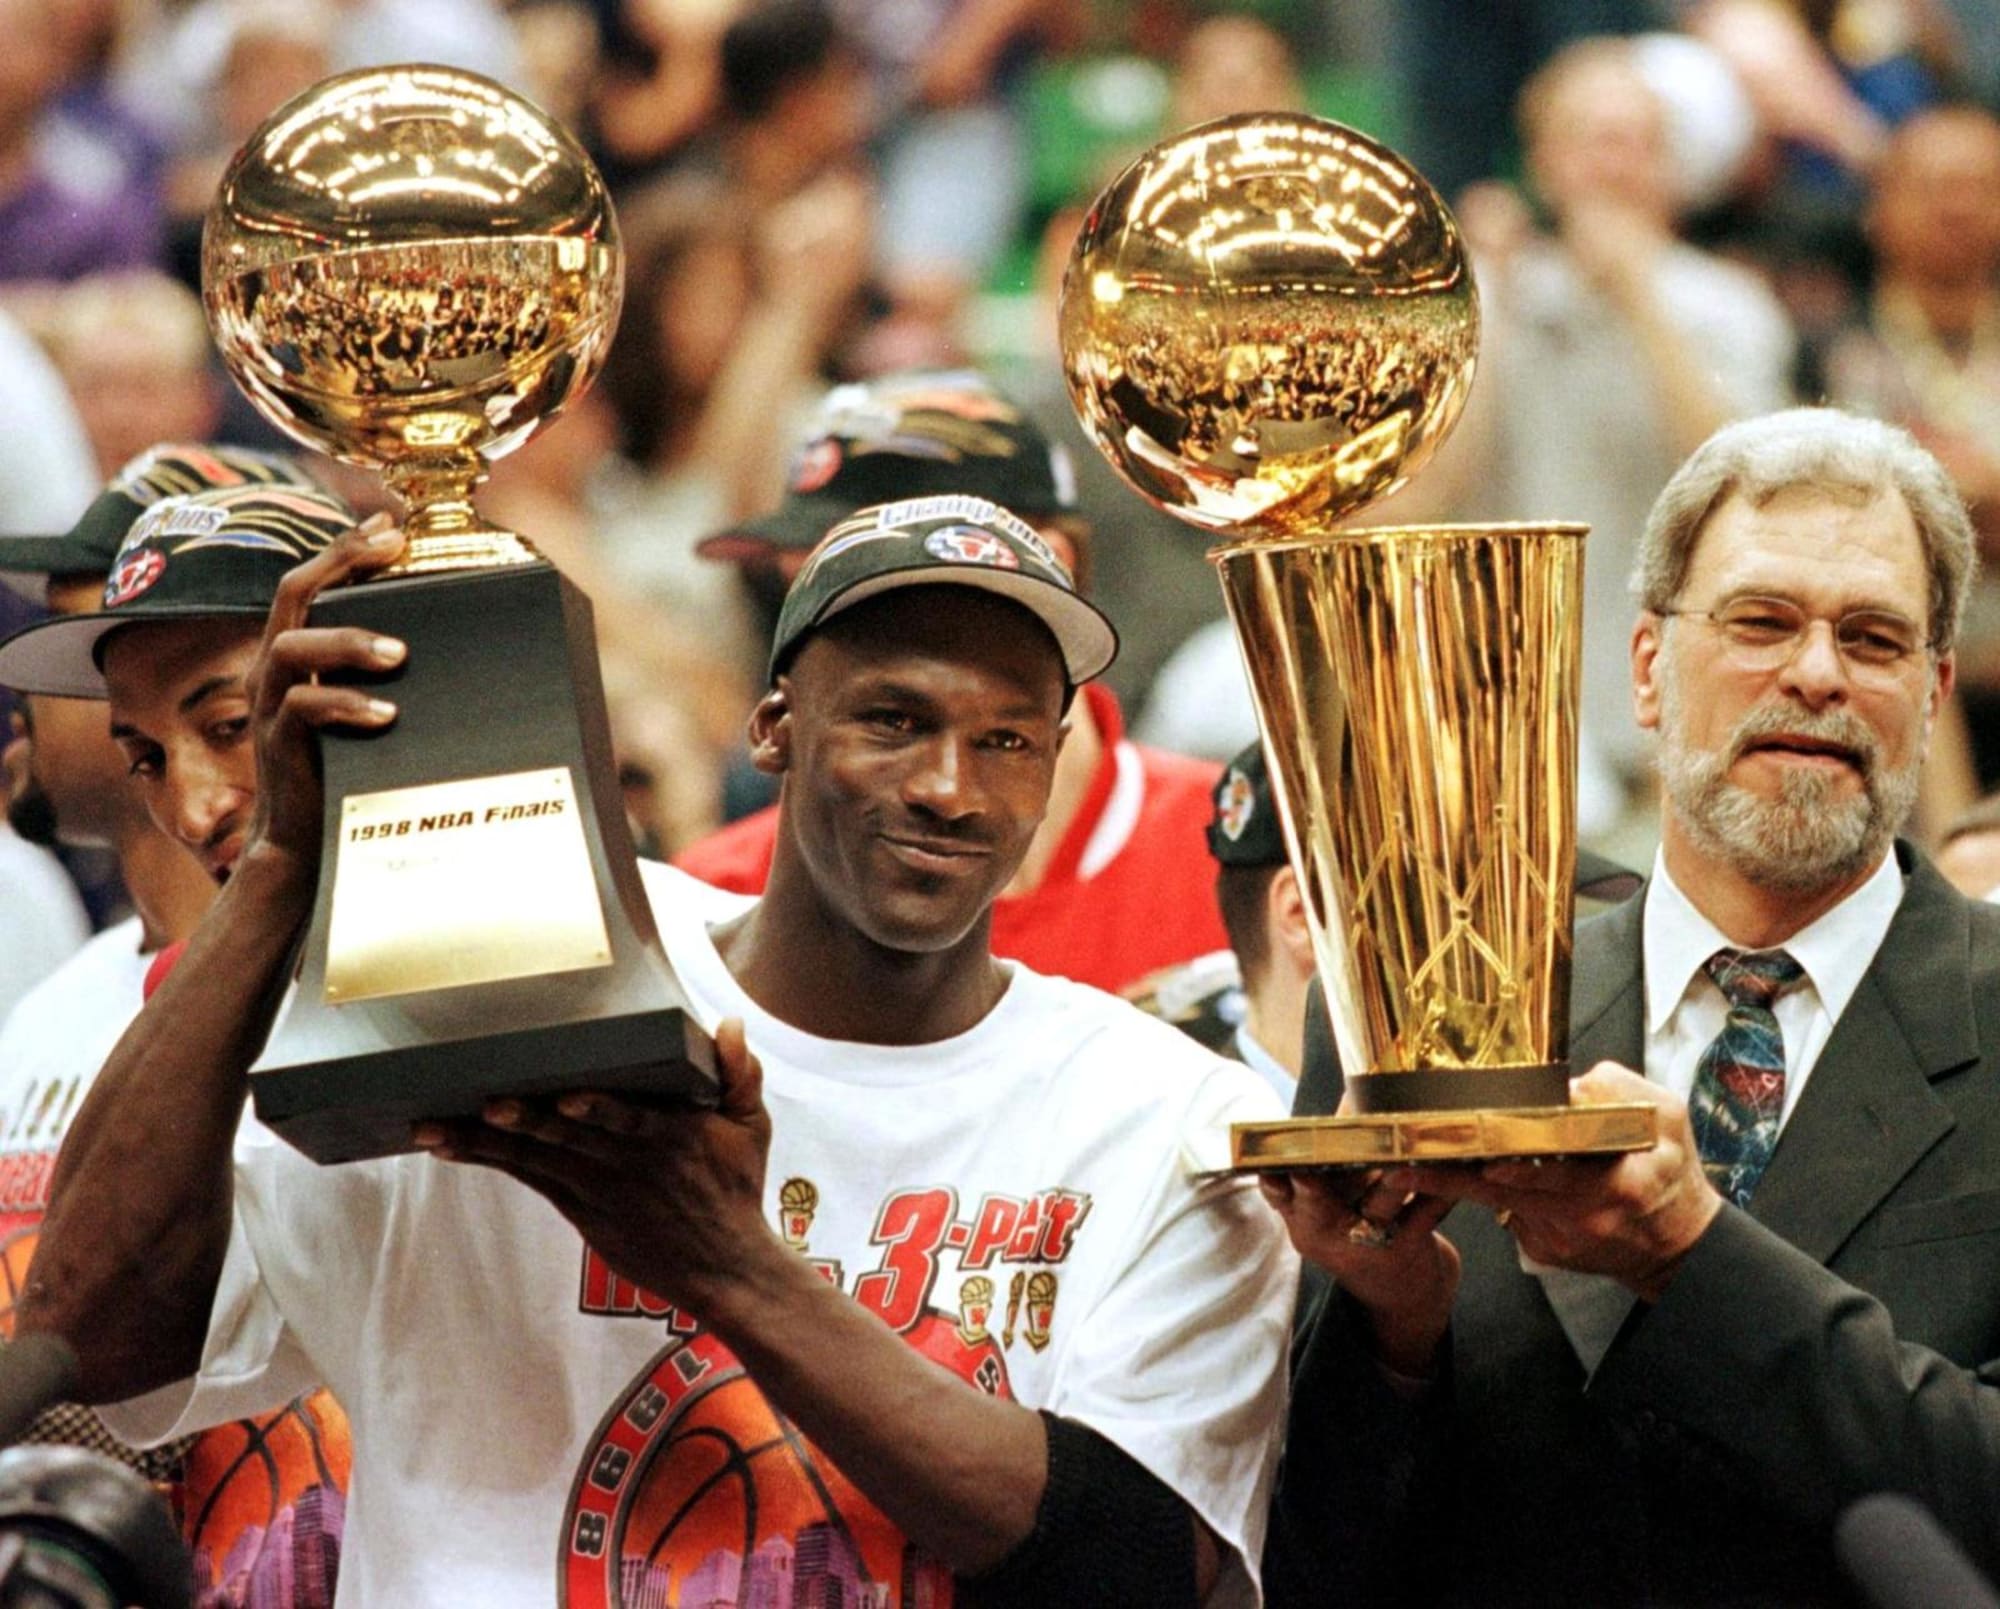 A snub from George Karl helped motivate Michael Jordan more in Finals